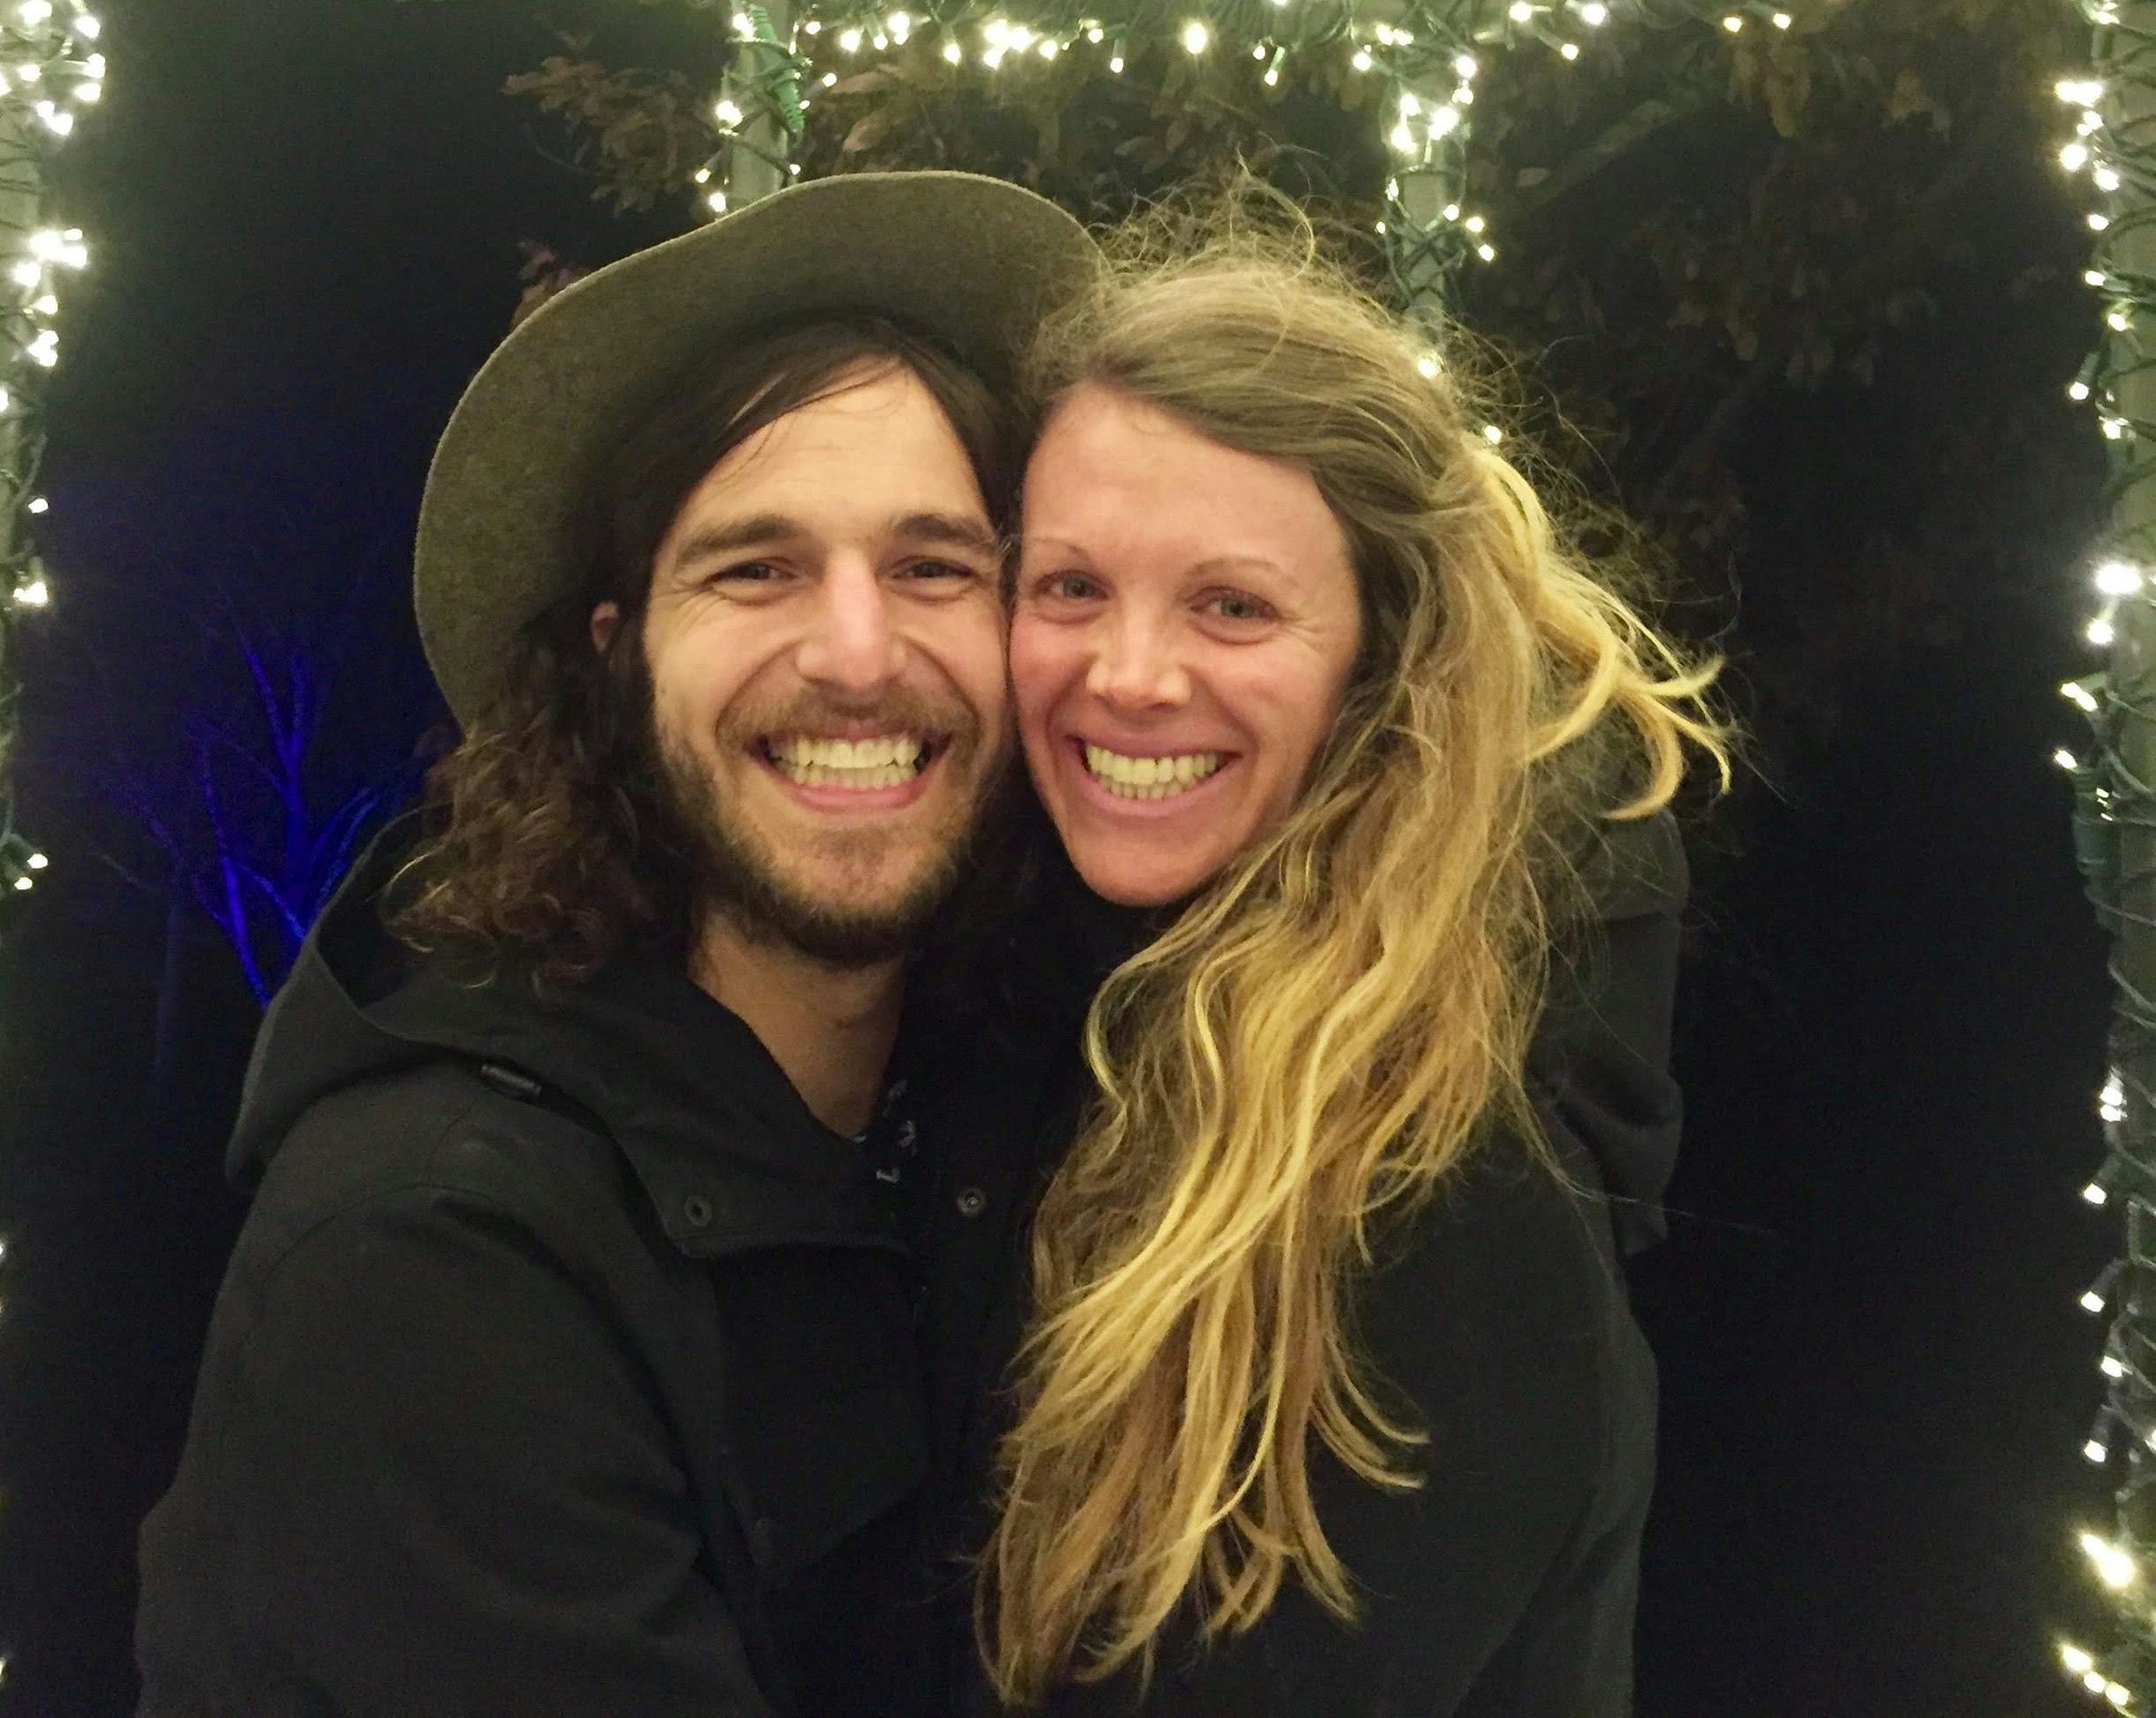 A couple with huge, genuine smiles stand under a gazebo coated in white Christmas lights. Nik is on the viewer's left in a grey hat and black jacket with long curly brown hair to his shoulders and a short beard. Lindsey has very long blond wavy hair to the bottom of the frame. She is wearing a black jacket.